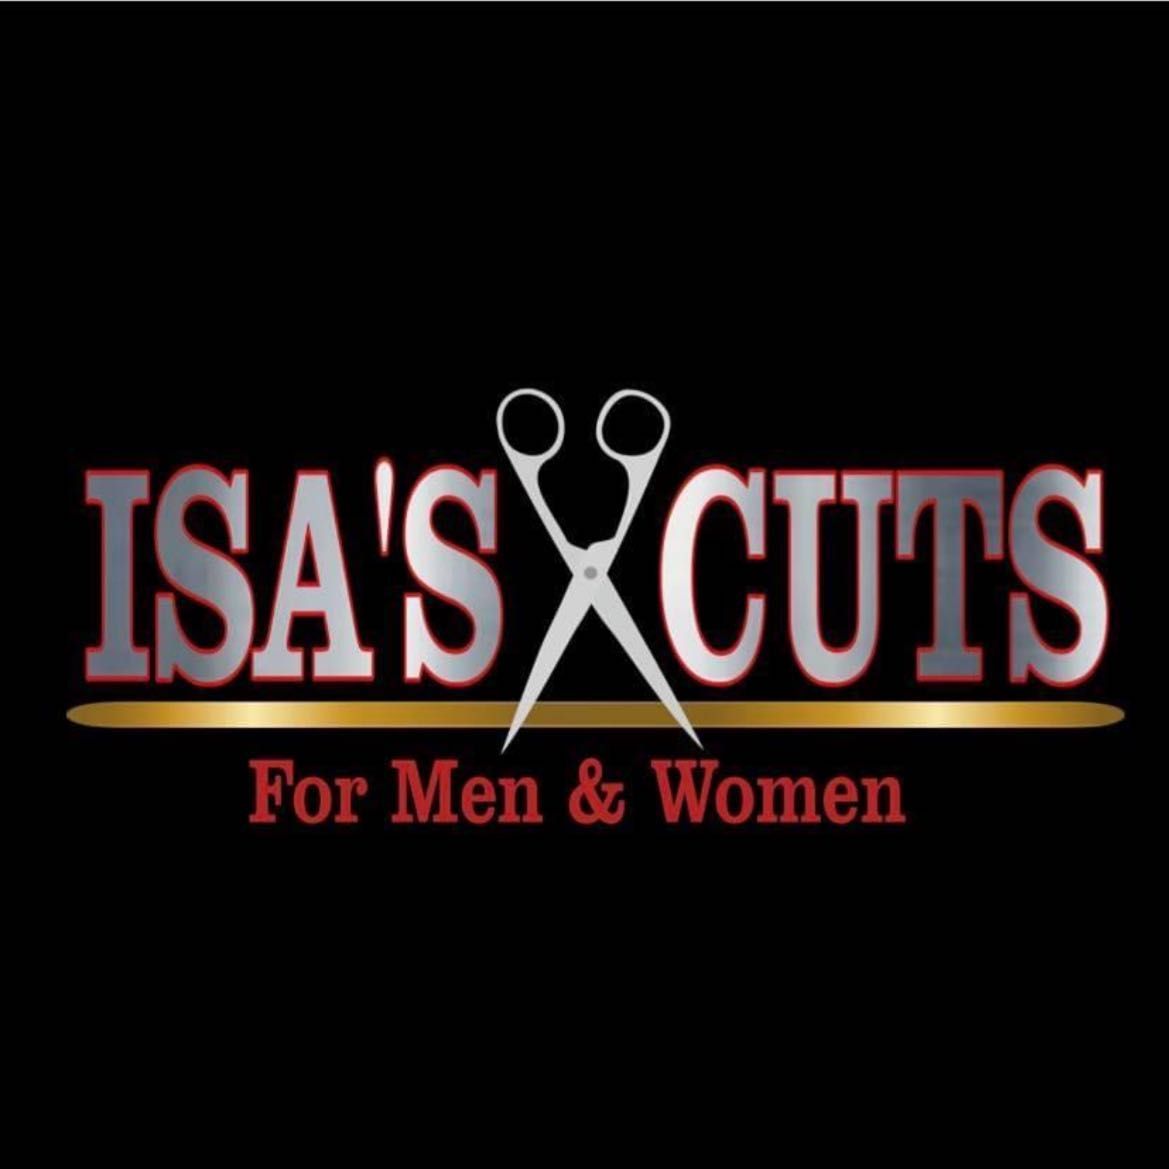 Isa’s Cuts, 3607 central ave, St Petersburg, 33713